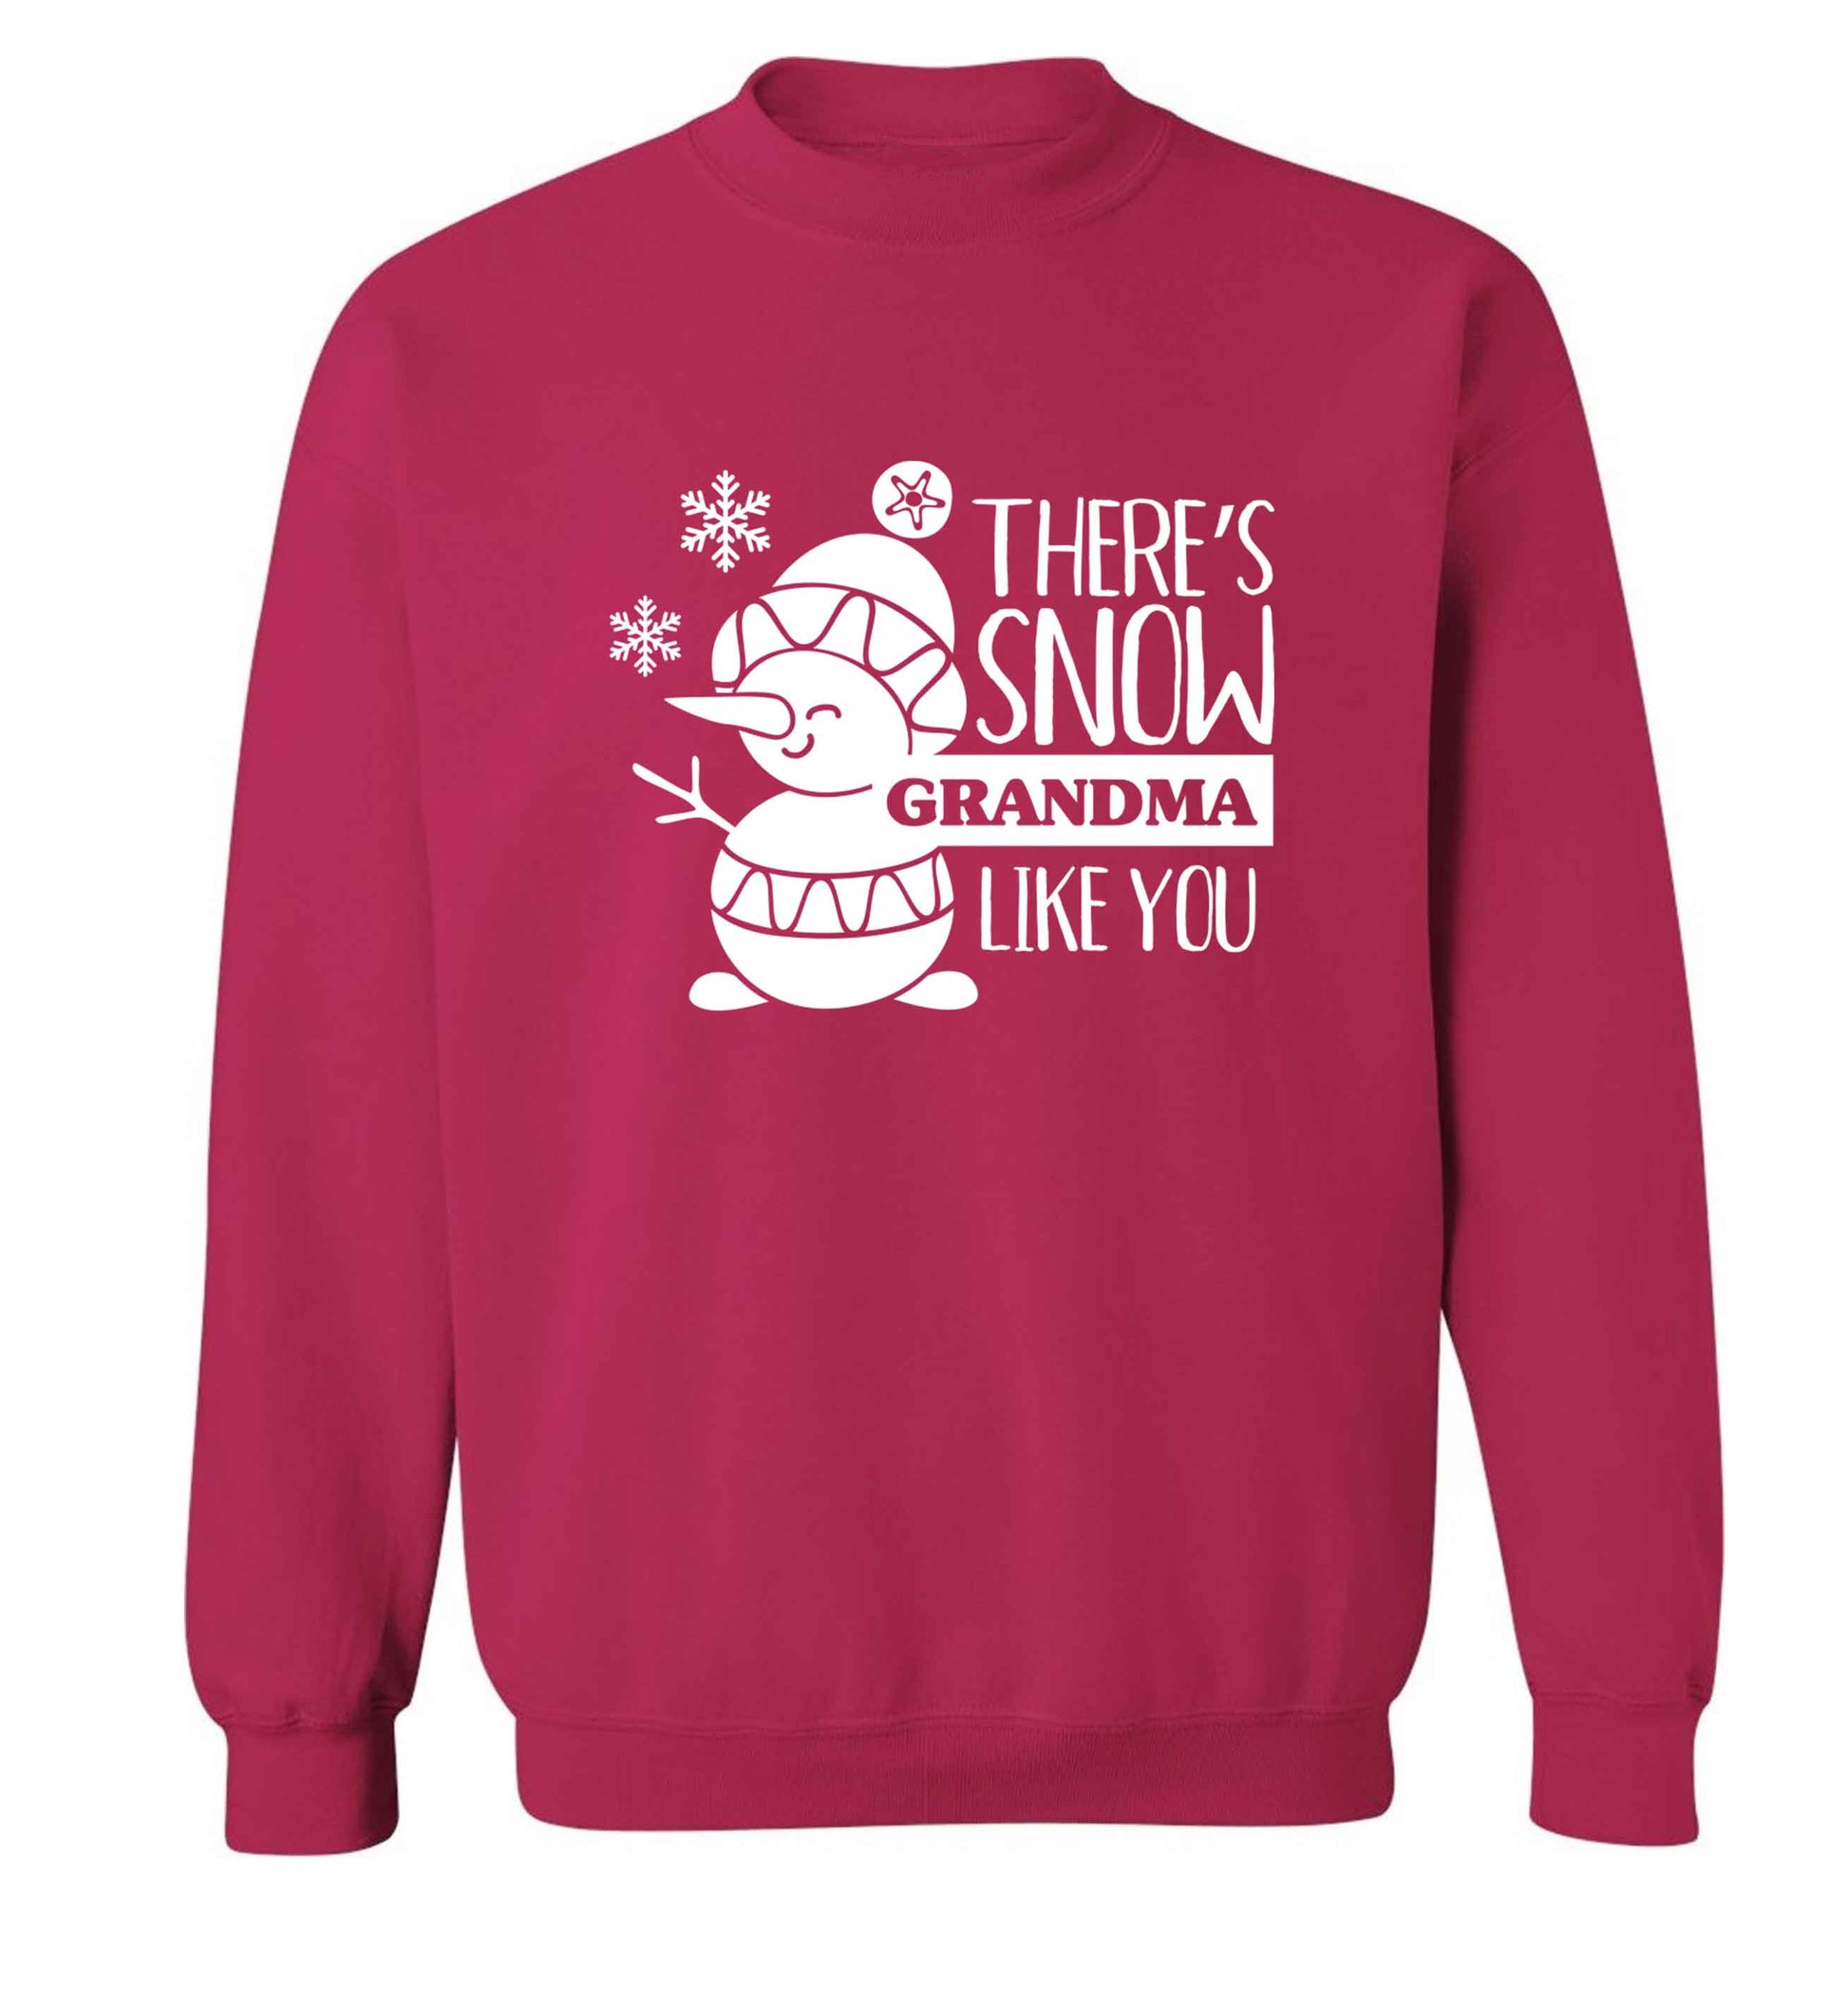 There's snow grandma like you adult's unisex pink sweater 2XL